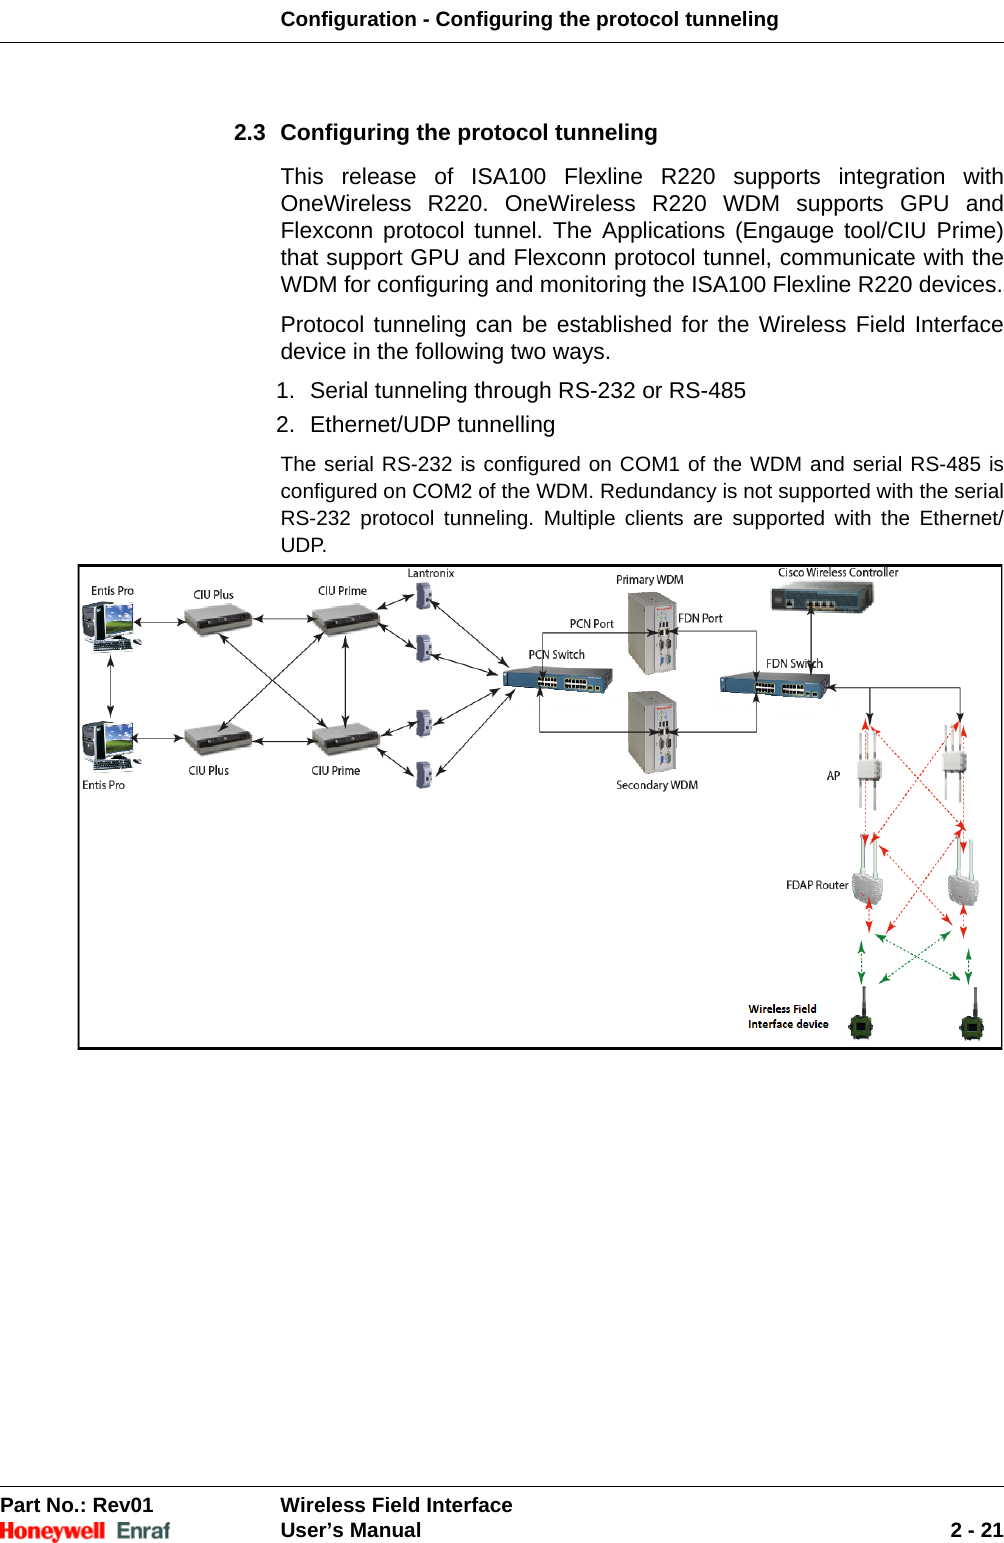 Configuration - Configuring the protocol tunnelingPart No.: Rev01  Wireless Field InterfaceUser’s Manual 2 - 212.3 Configuring the protocol tunnelingThis release of ISA100 Flexline R220 supports integration with OneWireless R220. OneWireless R220 WDM supports GPU and Flexconn protocol tunnel. The Applications (Engauge tool/CIU Prime) that support GPU and Flexconn protocol tunnel, communicate with the WDM for configuring and monitoring the ISA100 Flexline R220 devices.Protocol tunneling can be established for the Wireless Field Interface device in the following two ways.1. Serial tunneling through RS-232 or RS-485 2. Ethernet/UDP tunnelling The serial RS-232 is configured on COM1 of the WDM and serial RS-485 is configured on COM2 of the WDM. Redundancy is not supported with the serial RS-232 protocol tunneling. Multiple clients are supported with the Ethernet/UDP.